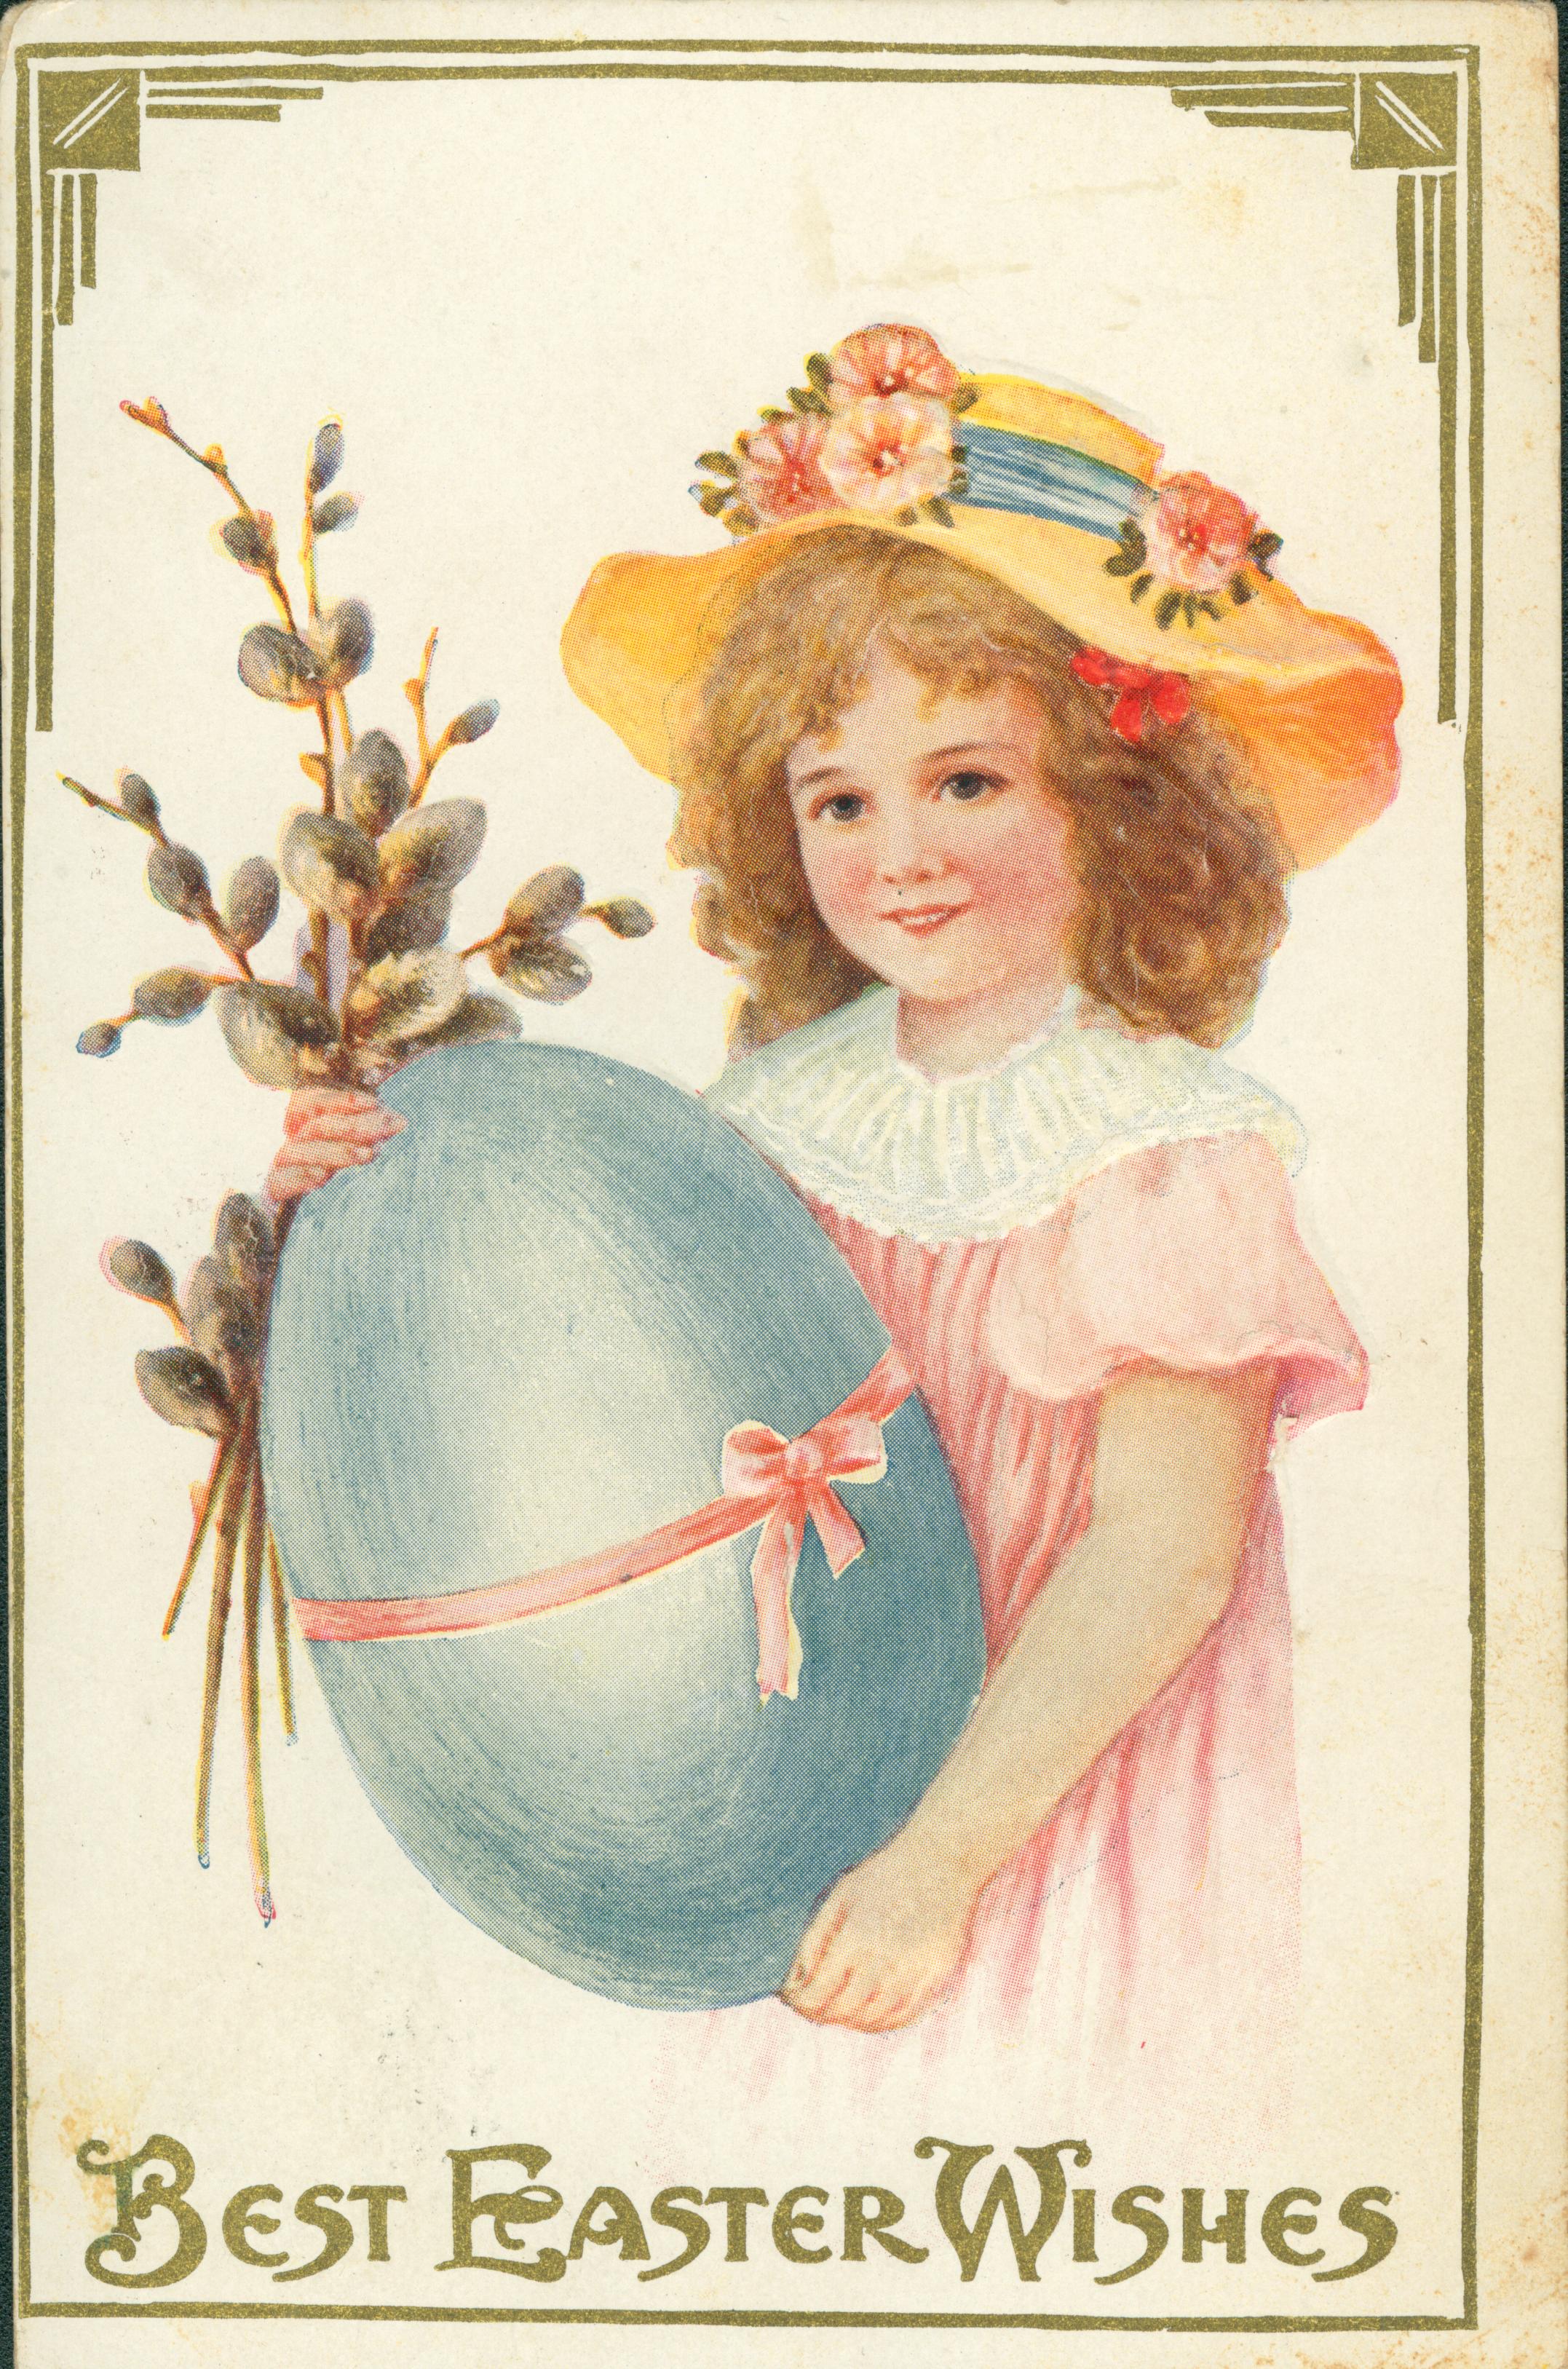 A young girl holding a large blue egg and some flowers.